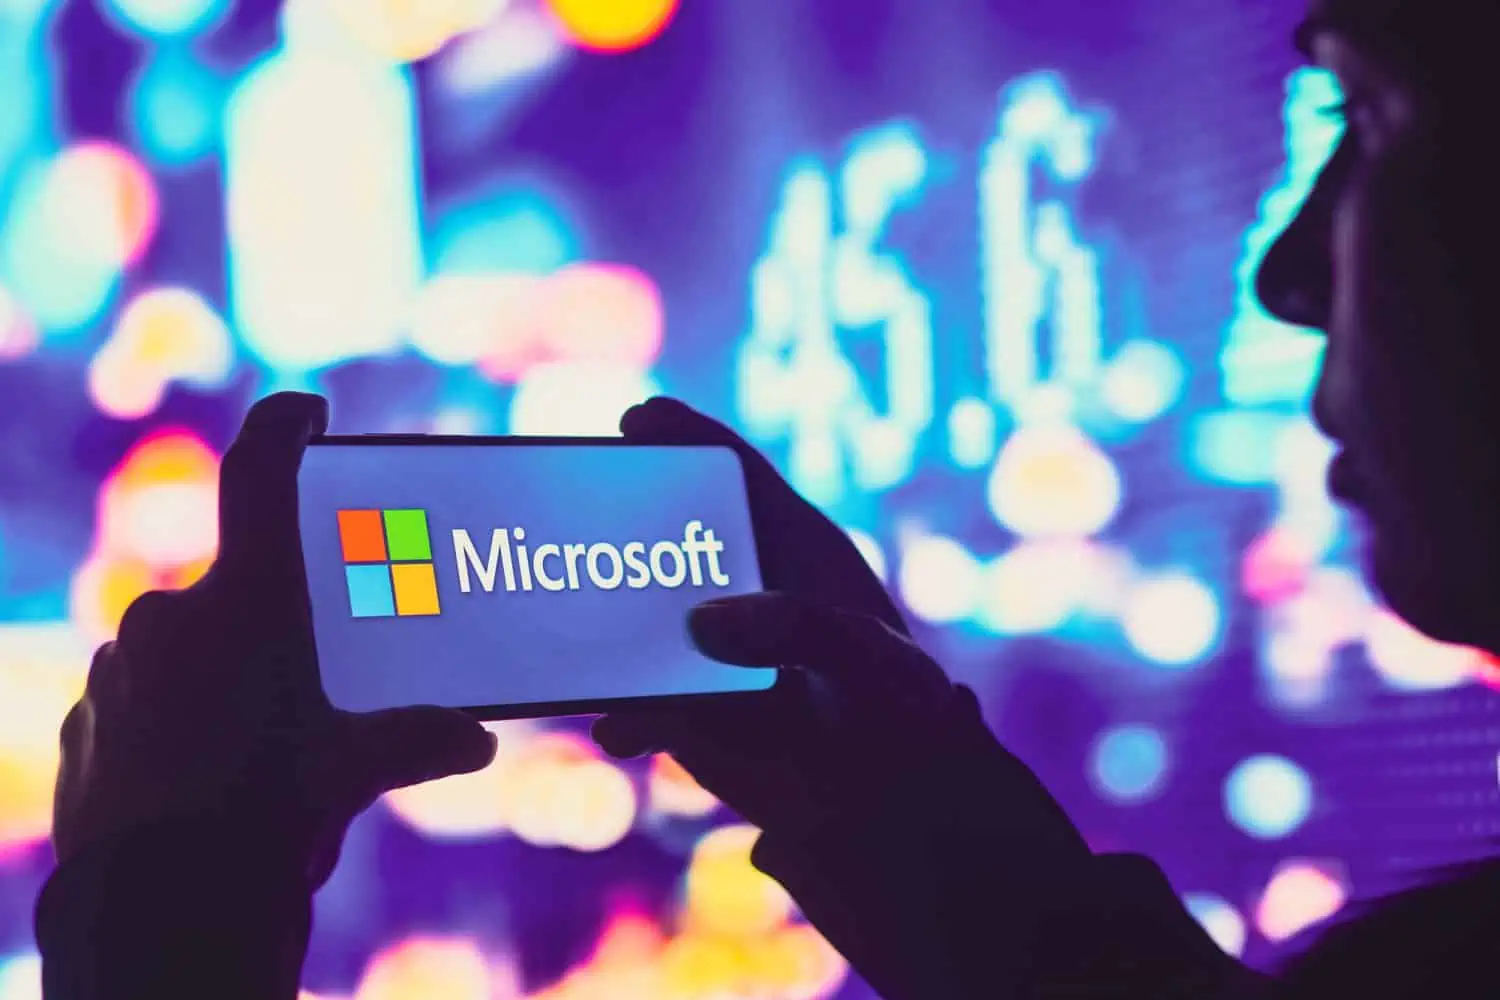 Microsoft execs reportedly considering creating a “super app” for smartphones